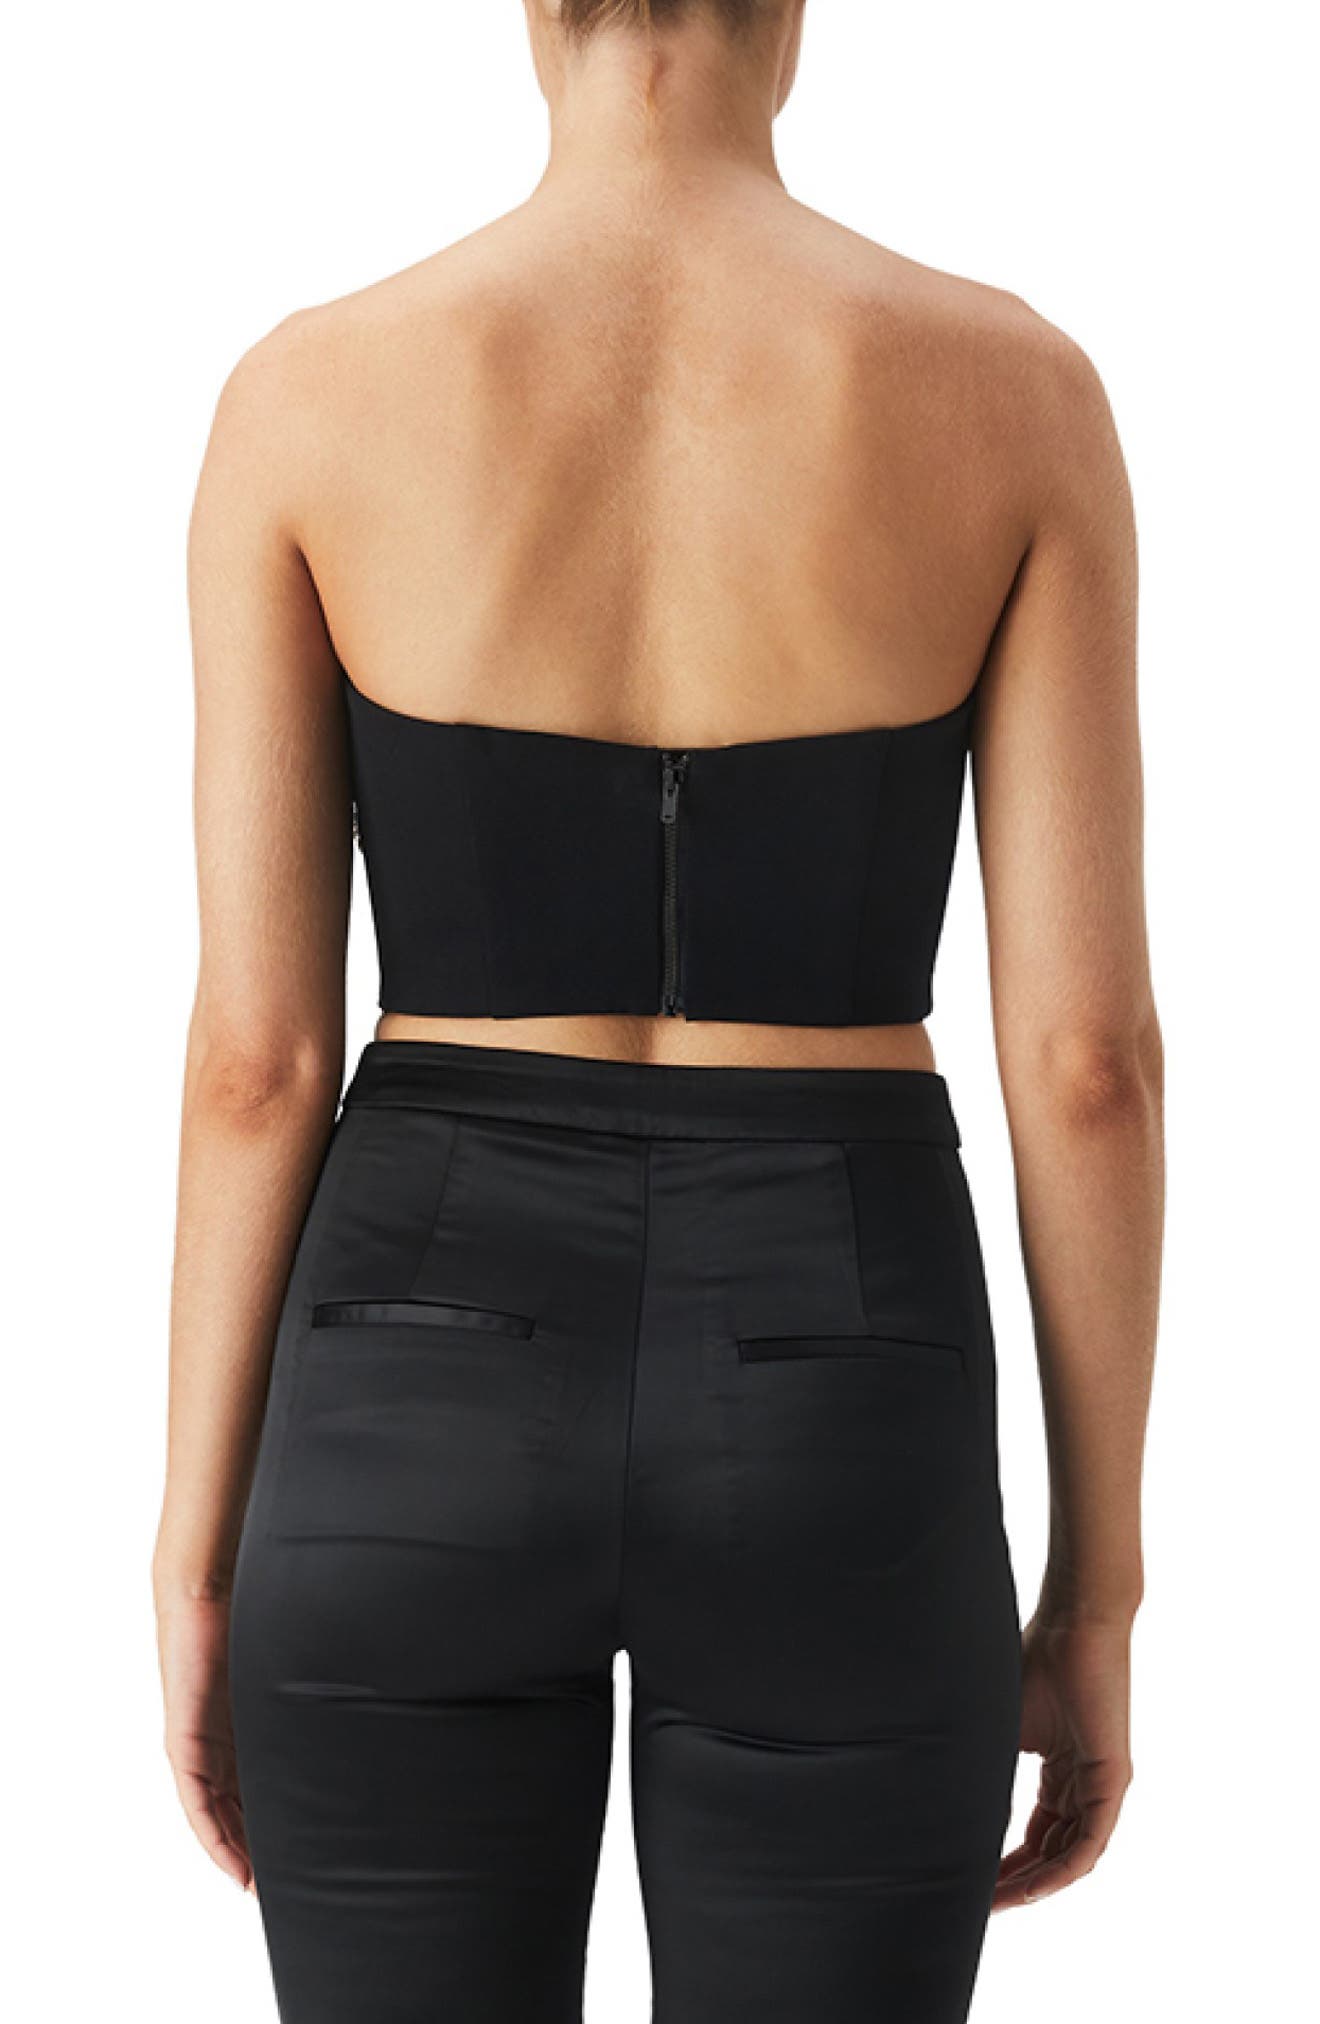 Bardot Ambiance Bustier Top in Black